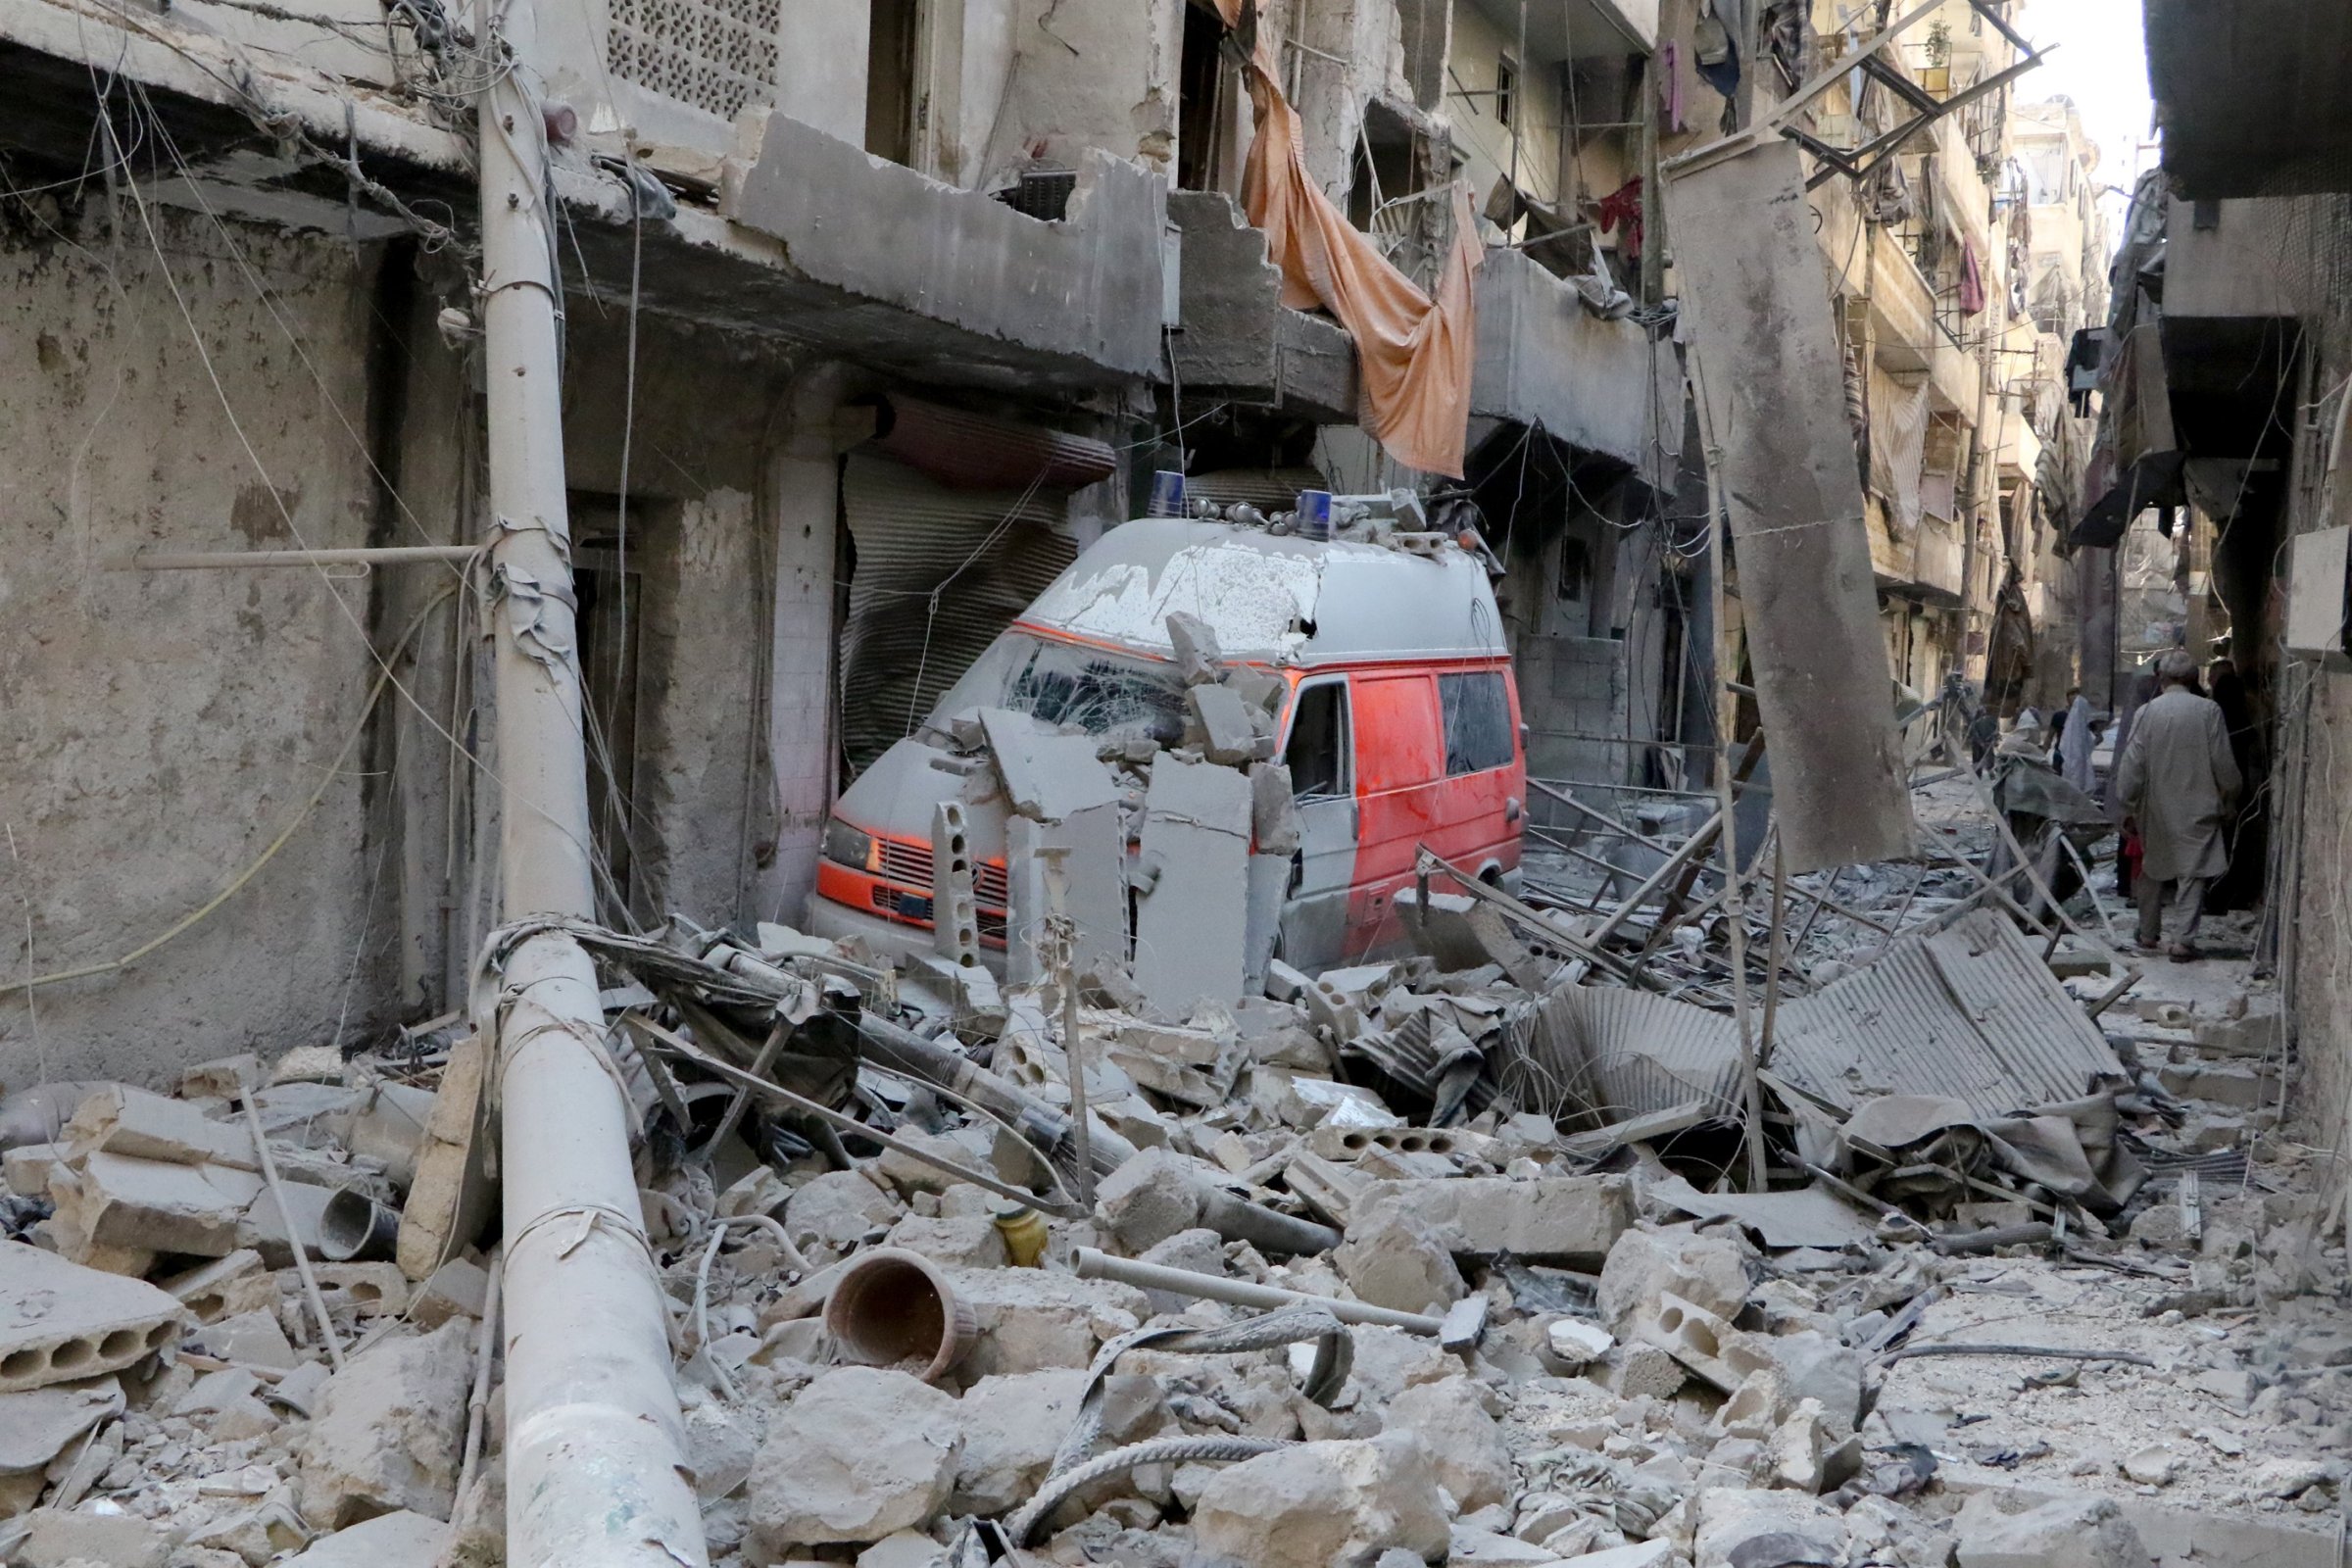 A wrecked ambulance is seen inside the debris of collapsed buildings after the Russian army hit the residential area with cluster bombs over opposition controlled Salihin neighborhood of Aleppo, Syria on Sept. 11, 2016.